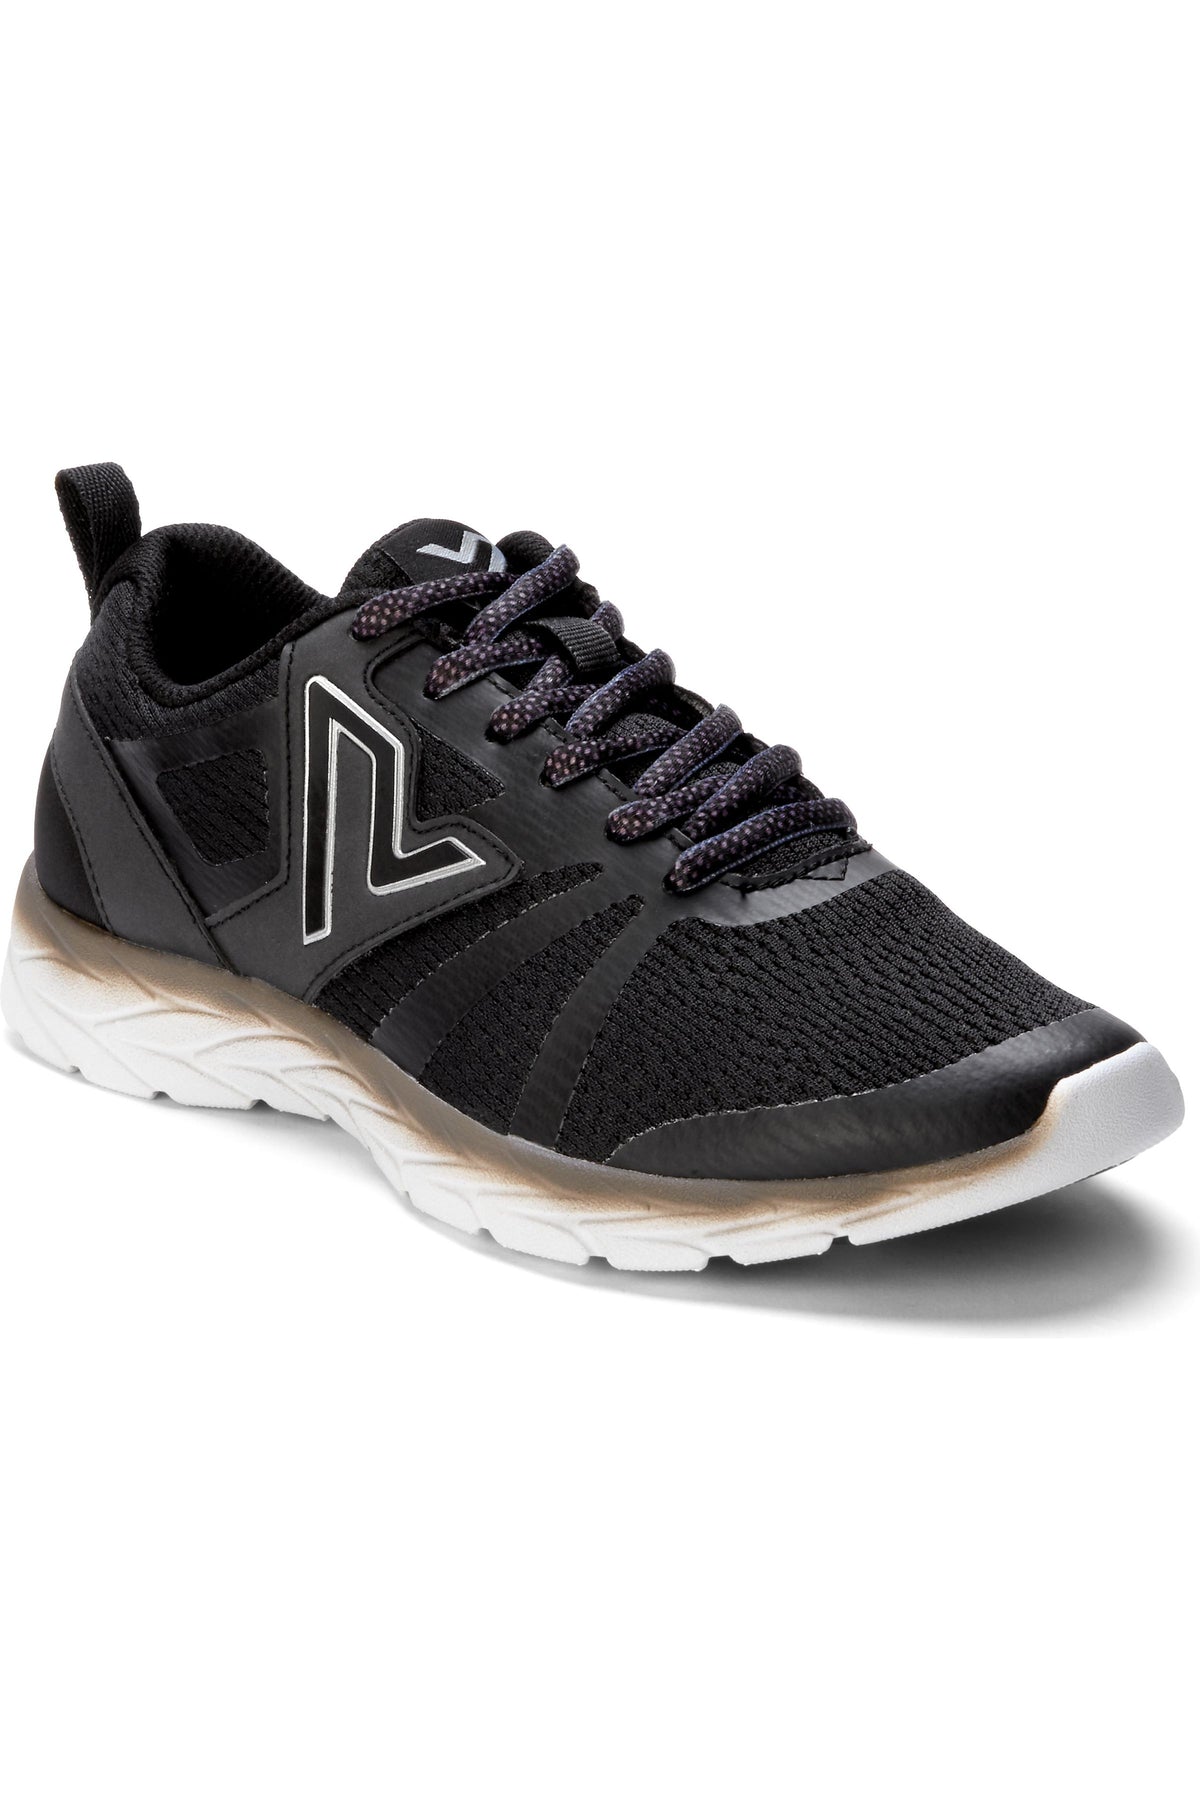 Vionic Brisk Miles Lace-Up Active Sneakers, angle, black